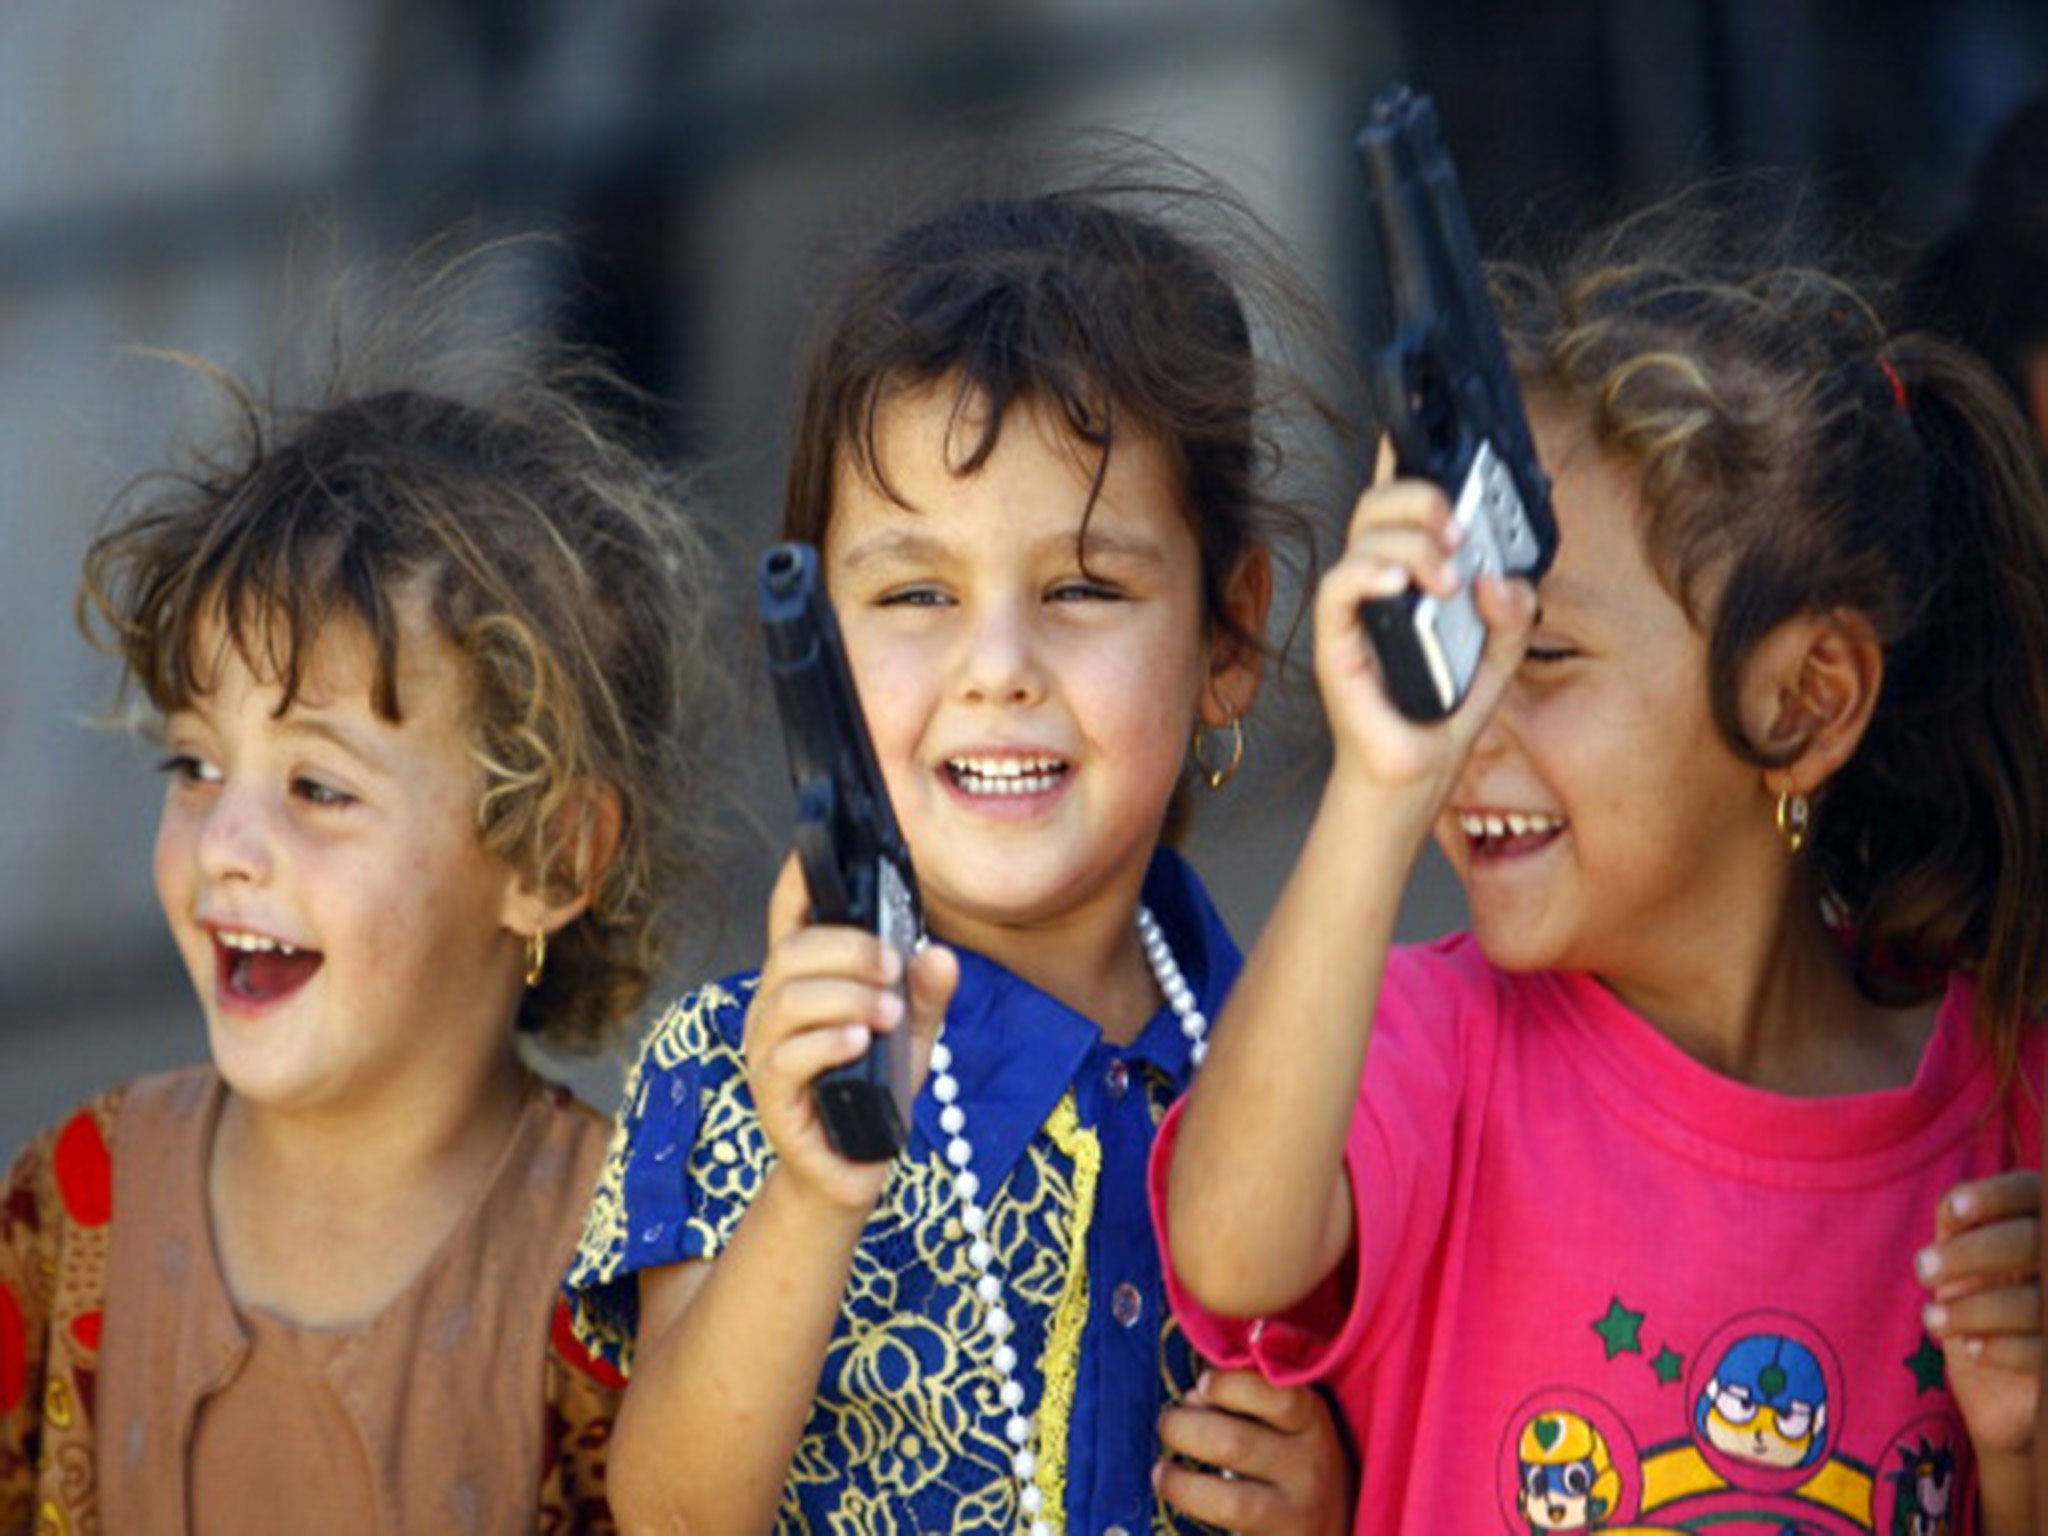 Iraqi Shiite children from Mosul play with toy guns